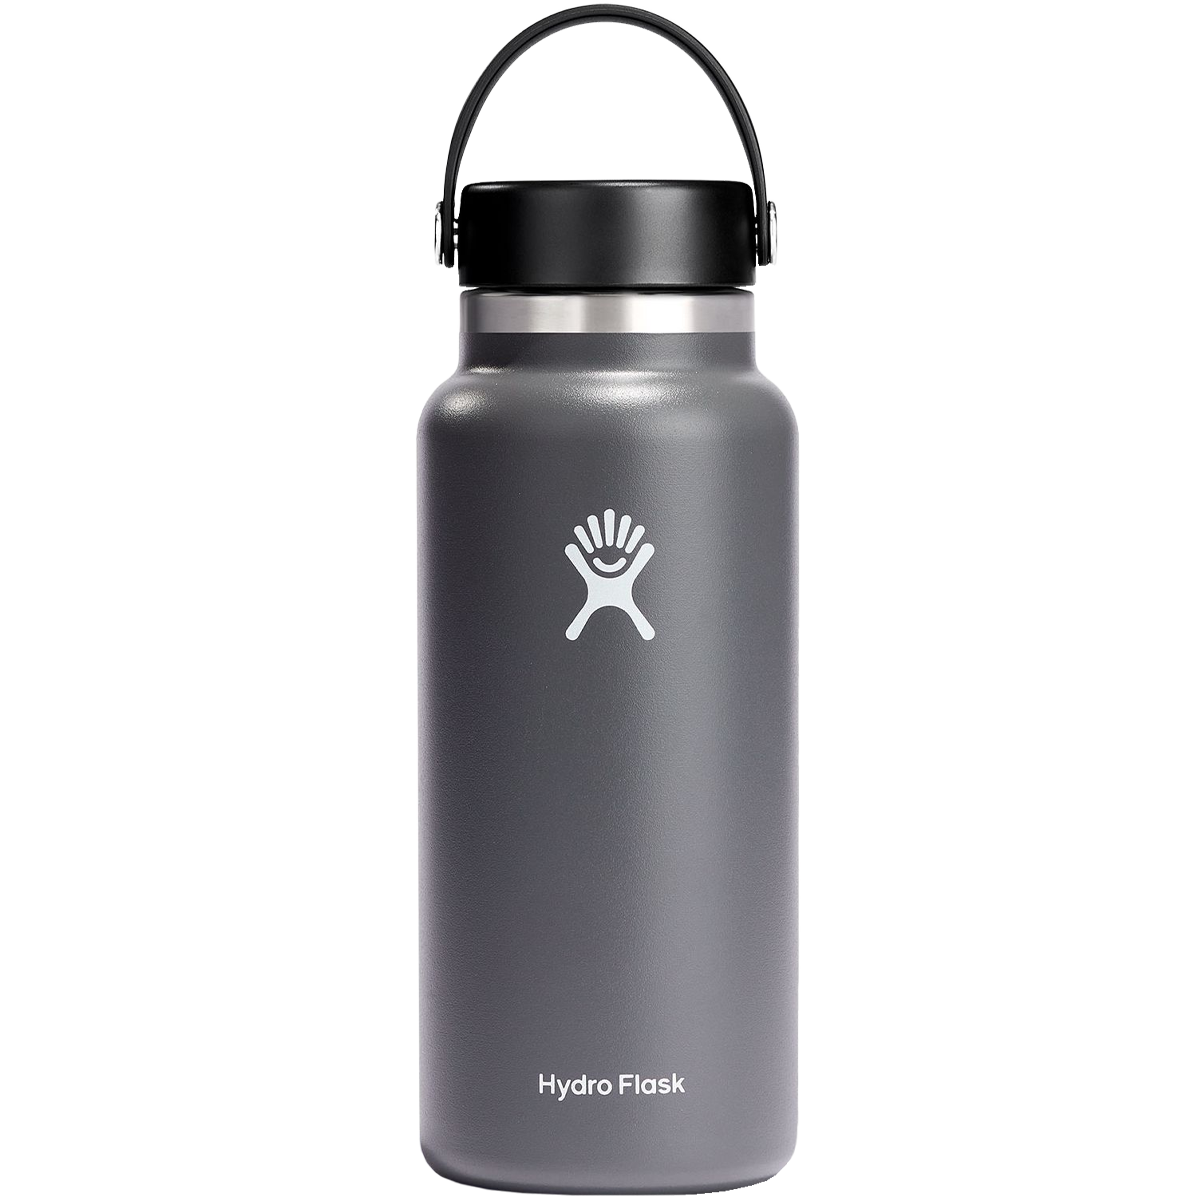 32 OZ DOUBLE-WALL STAINLESS STEEL WATER BOTTLE - BLACK CHECKER